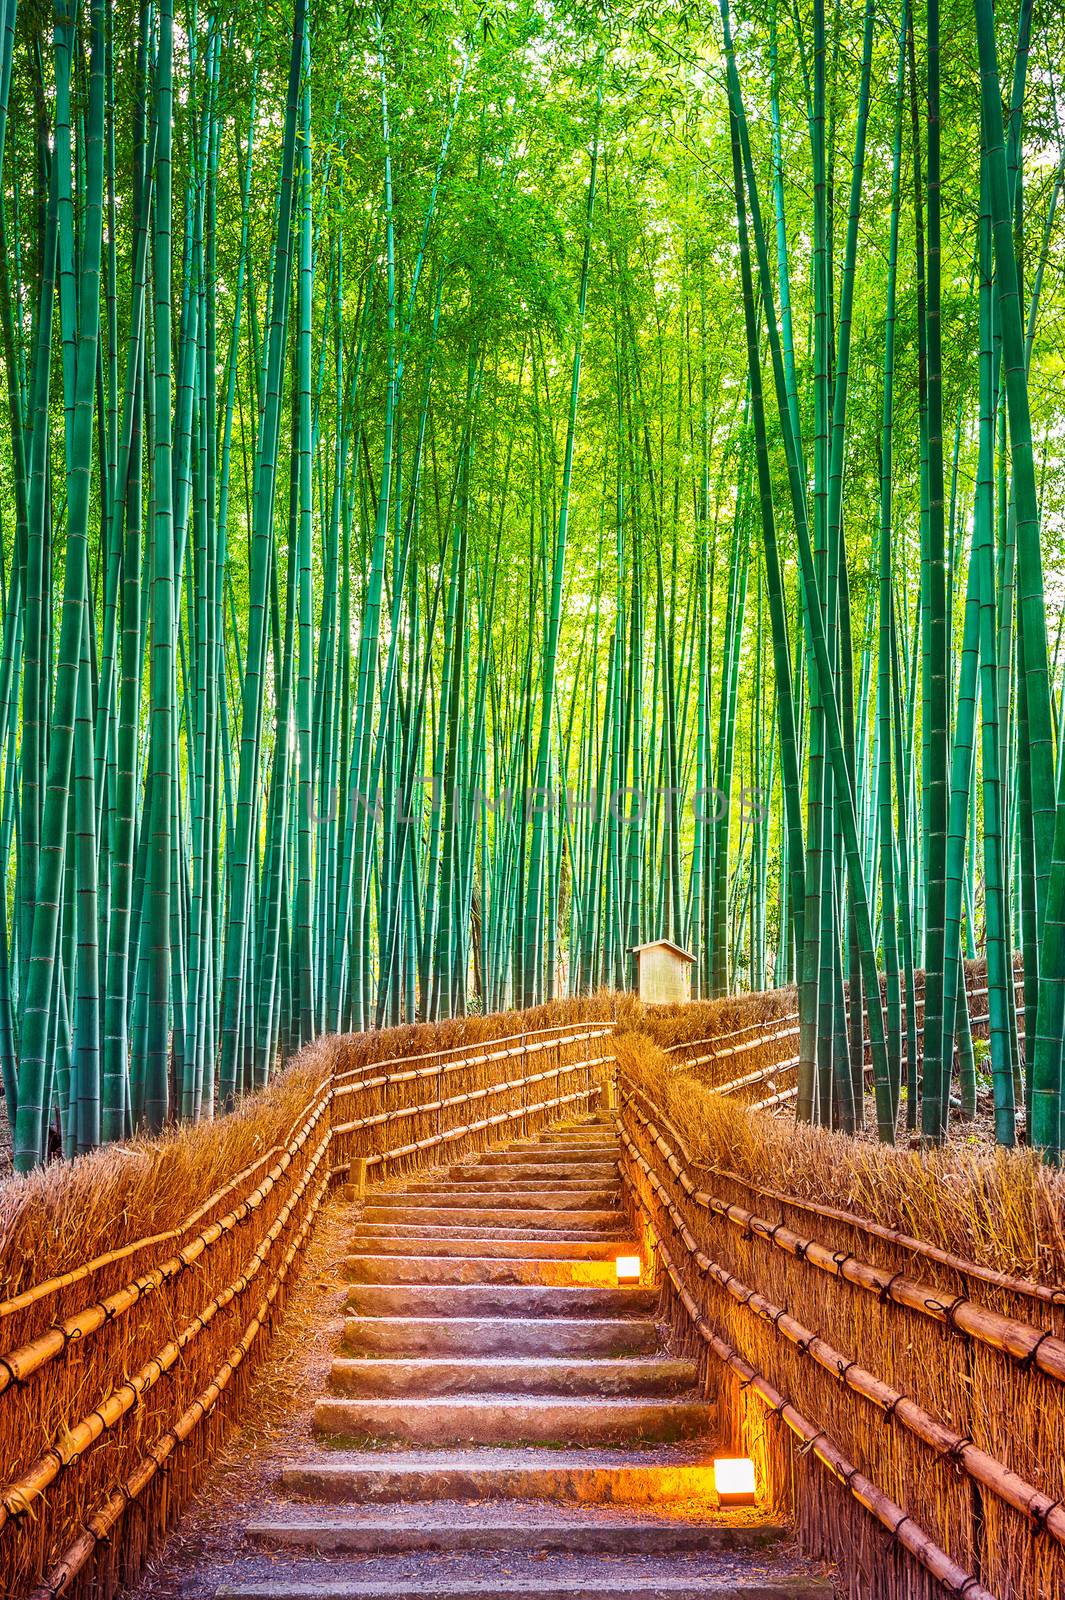 Bamboo Forest in Kyoto, Japan. by gutarphotoghaphy